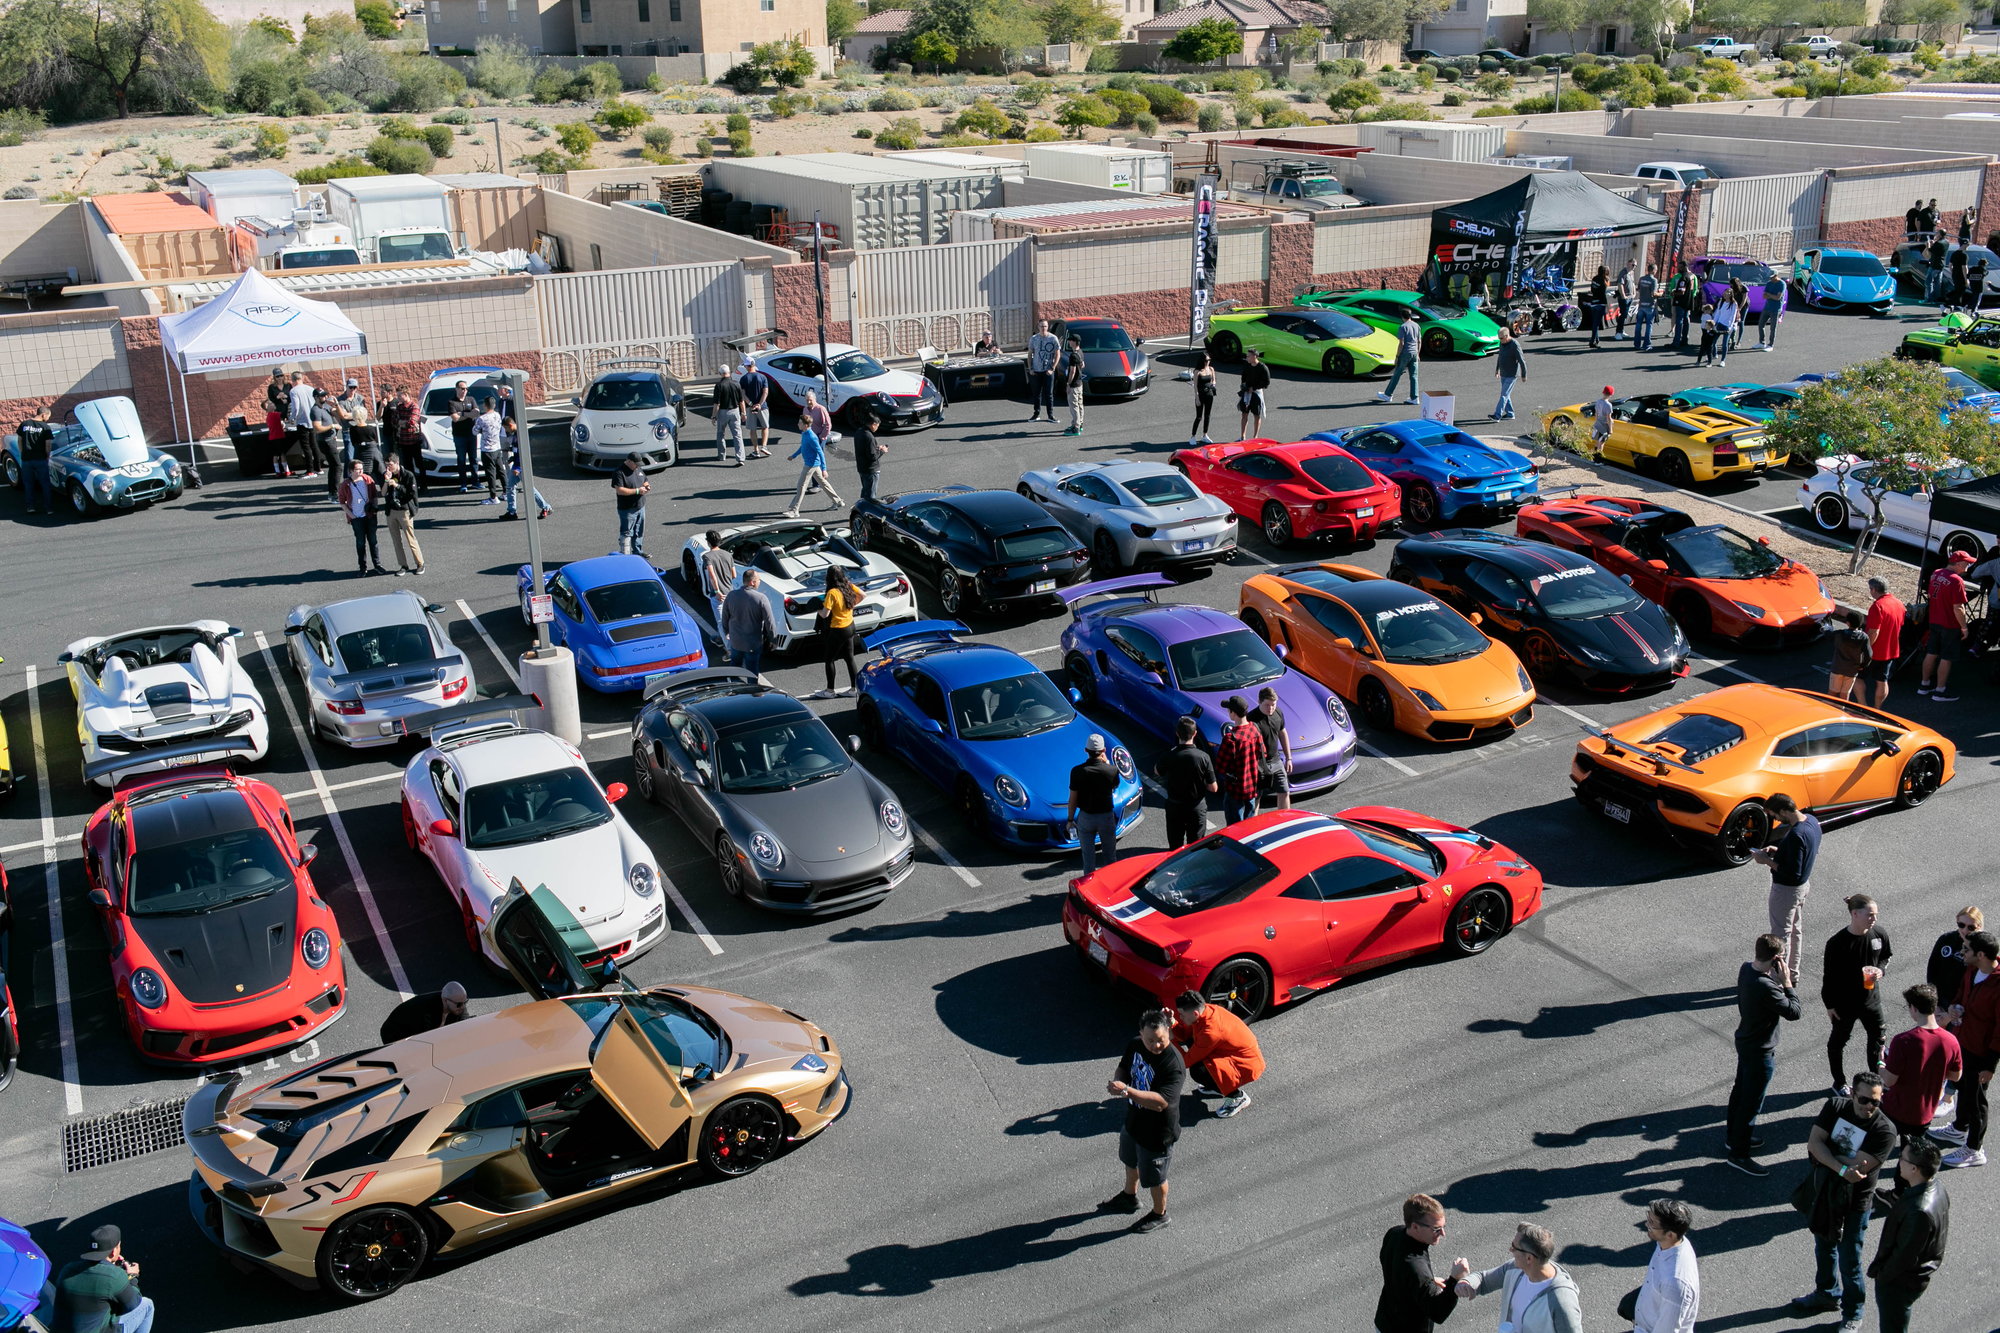 Car Show/Event in Scottsdale AZ this Sat the 26th Page 2 Rennlist